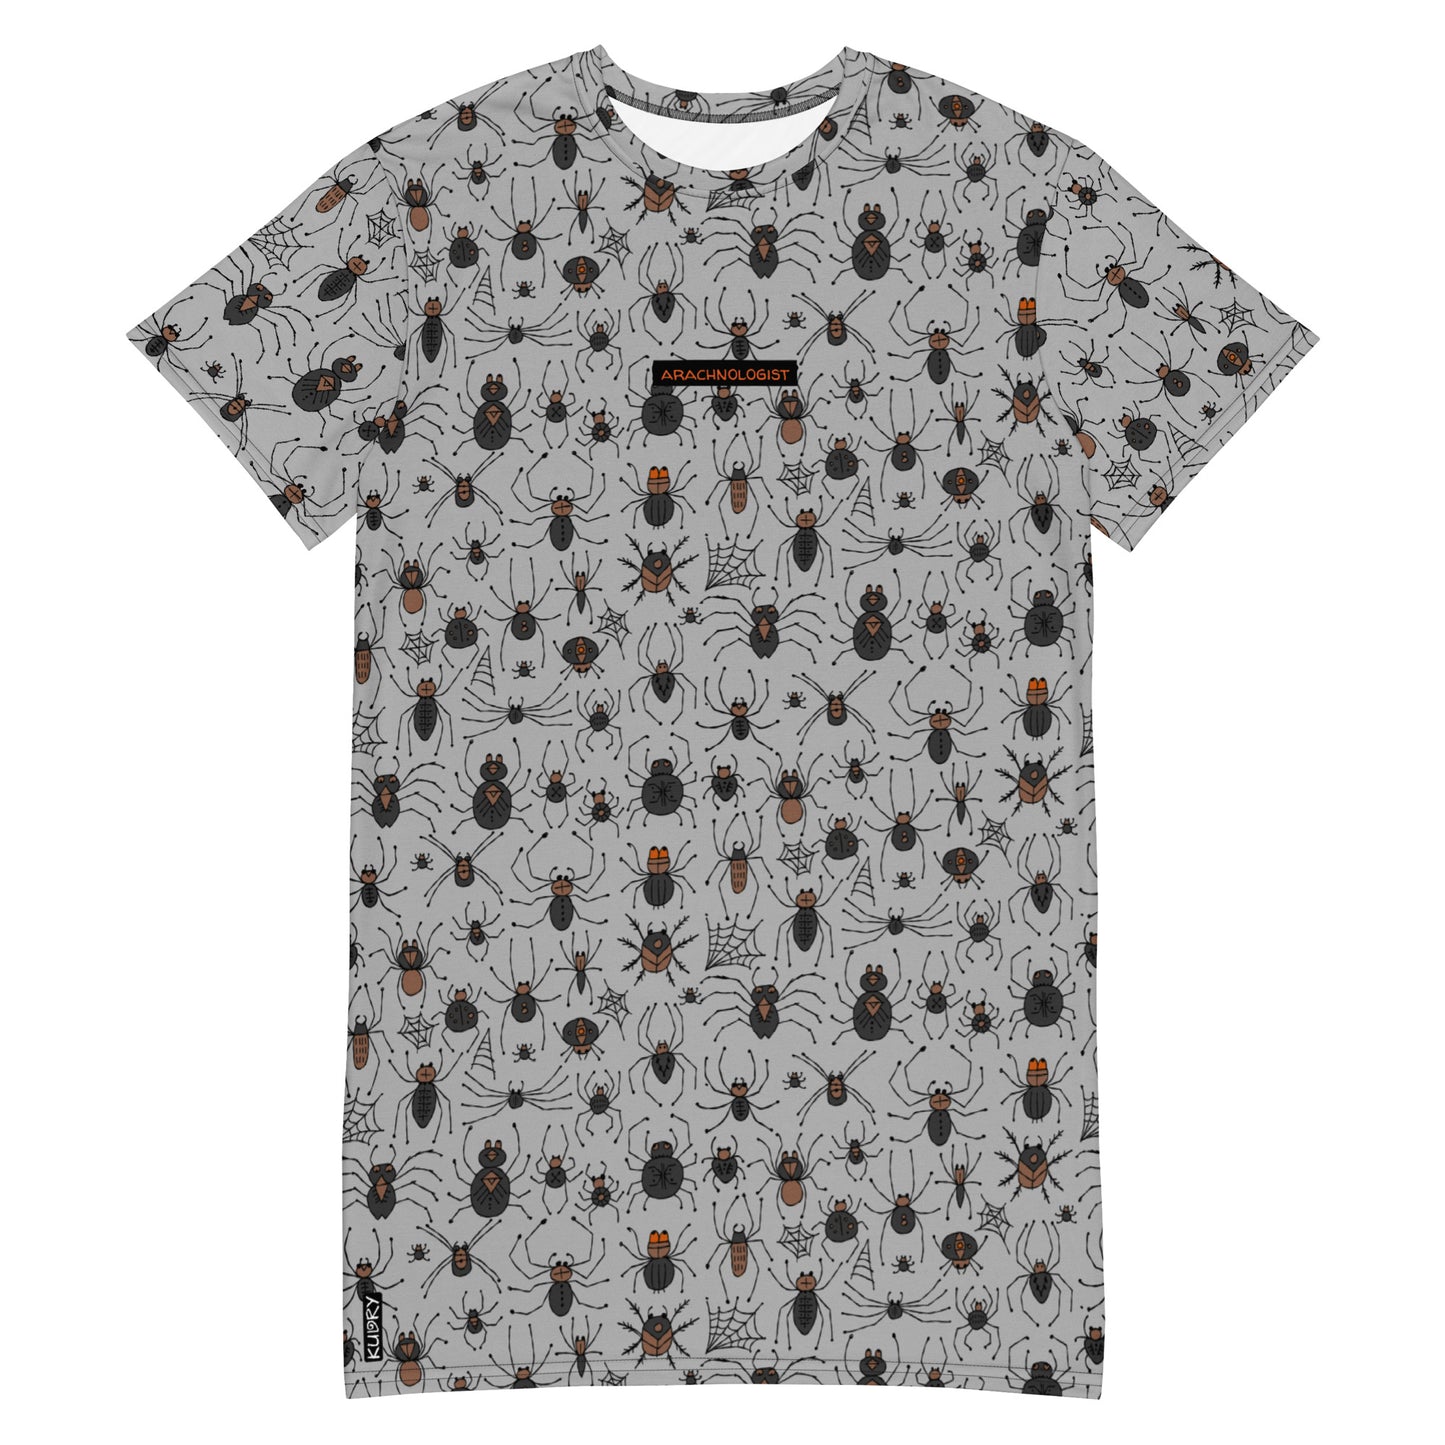 T-shirt dress grey color with funny Spiders and personalised text. Basic text - Arachnology